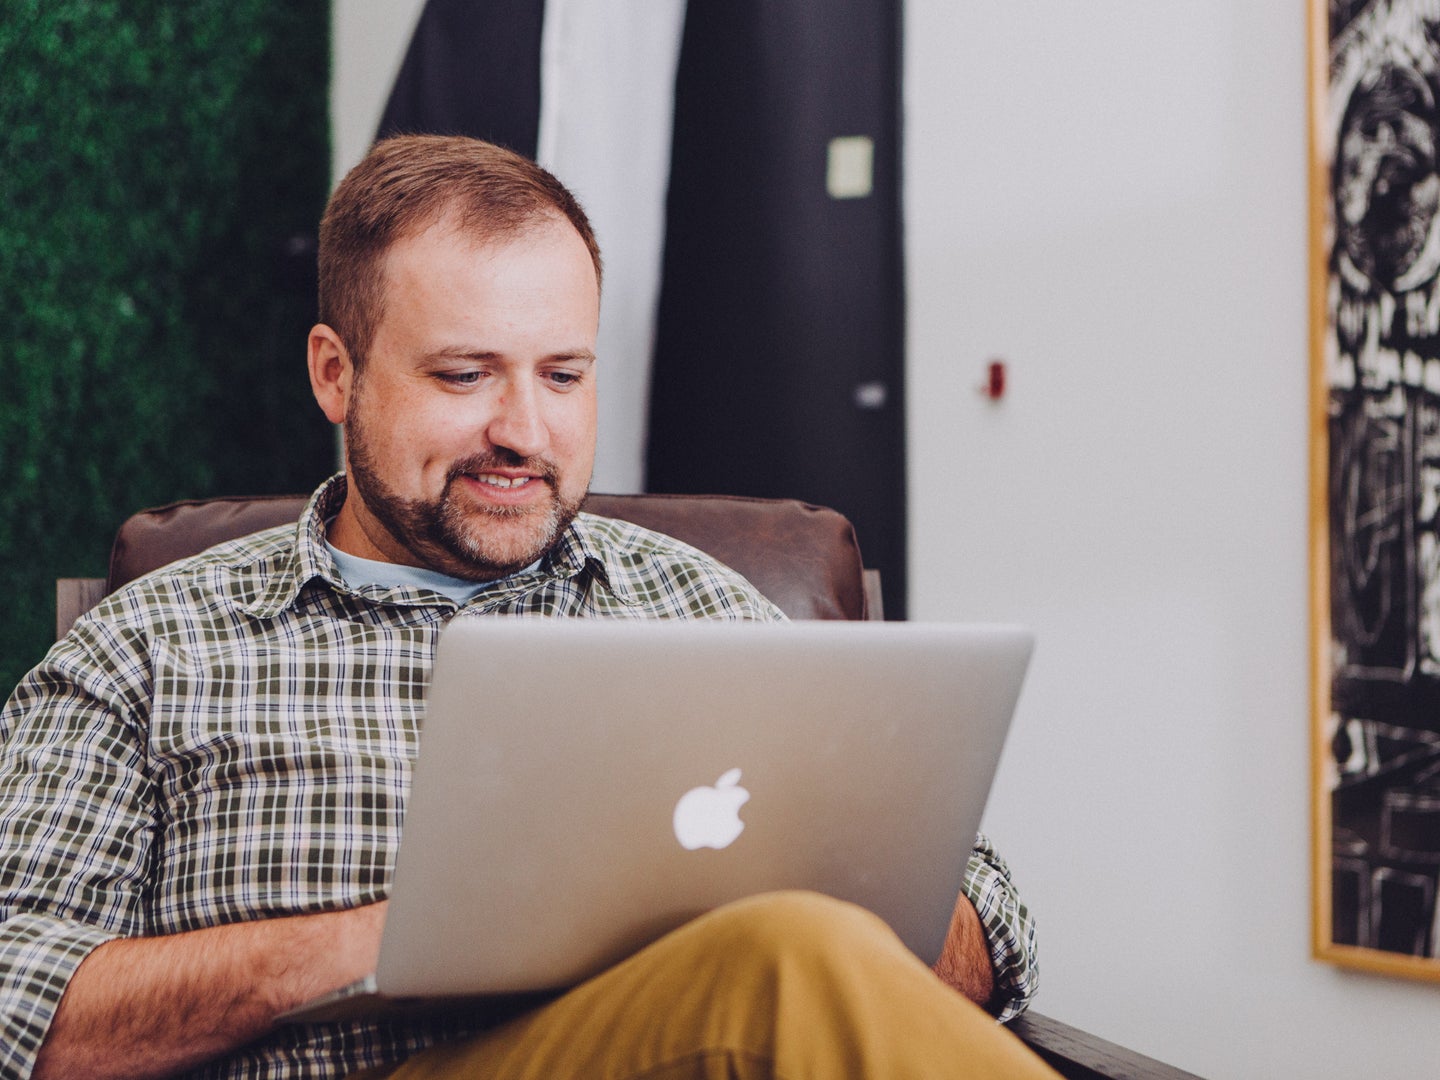 A man in a green plaid shirt sitting in a chair and smiling while using a Macbook laptop.